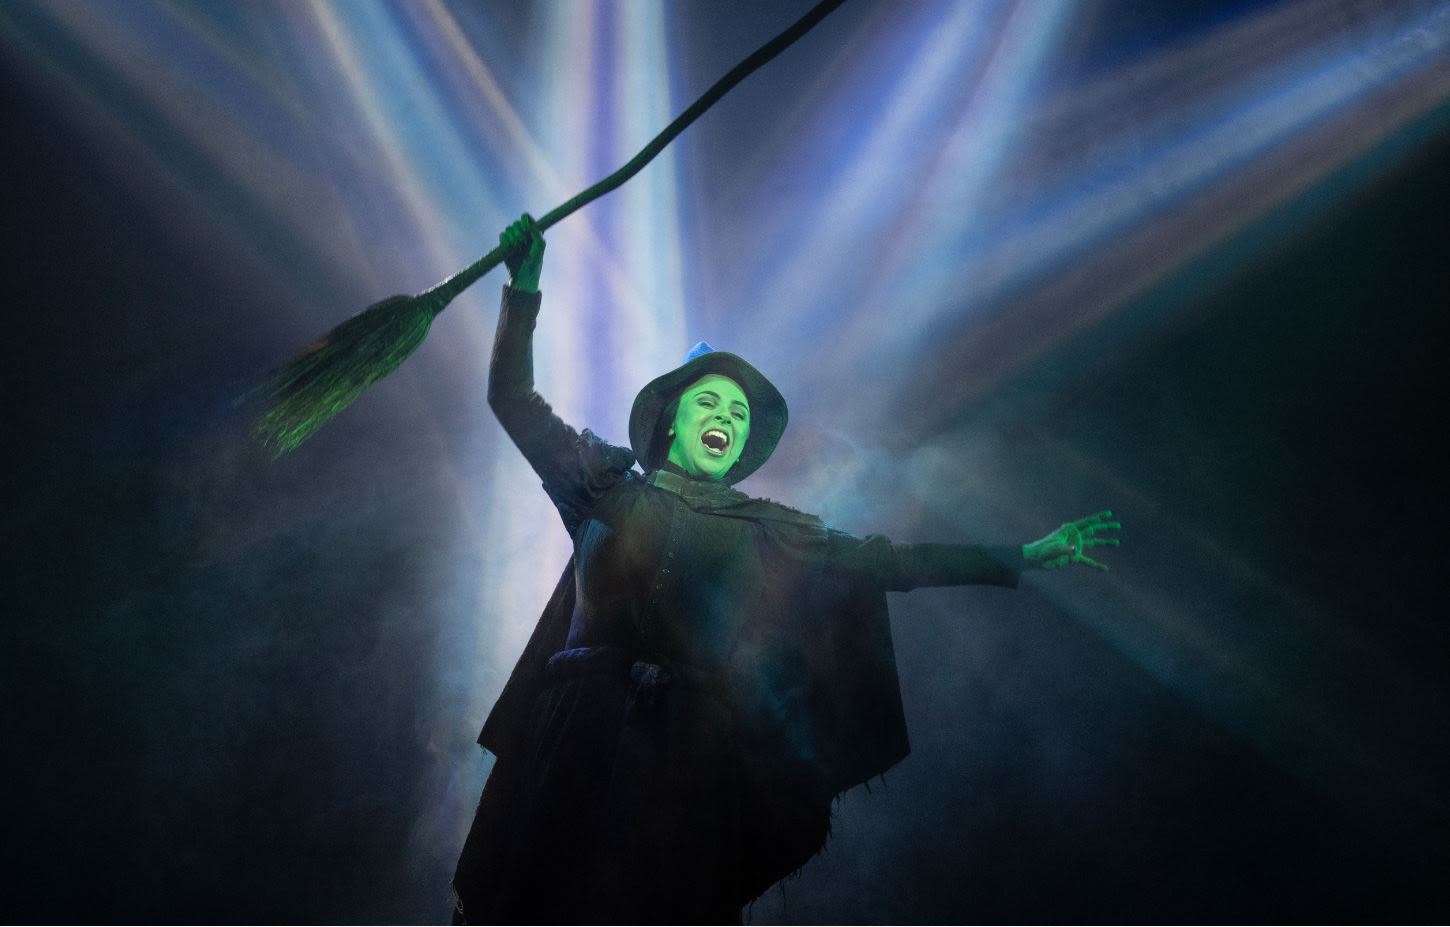 'Wicked' returns to Seattle's Paramount Theatre; tickets go on sale in July